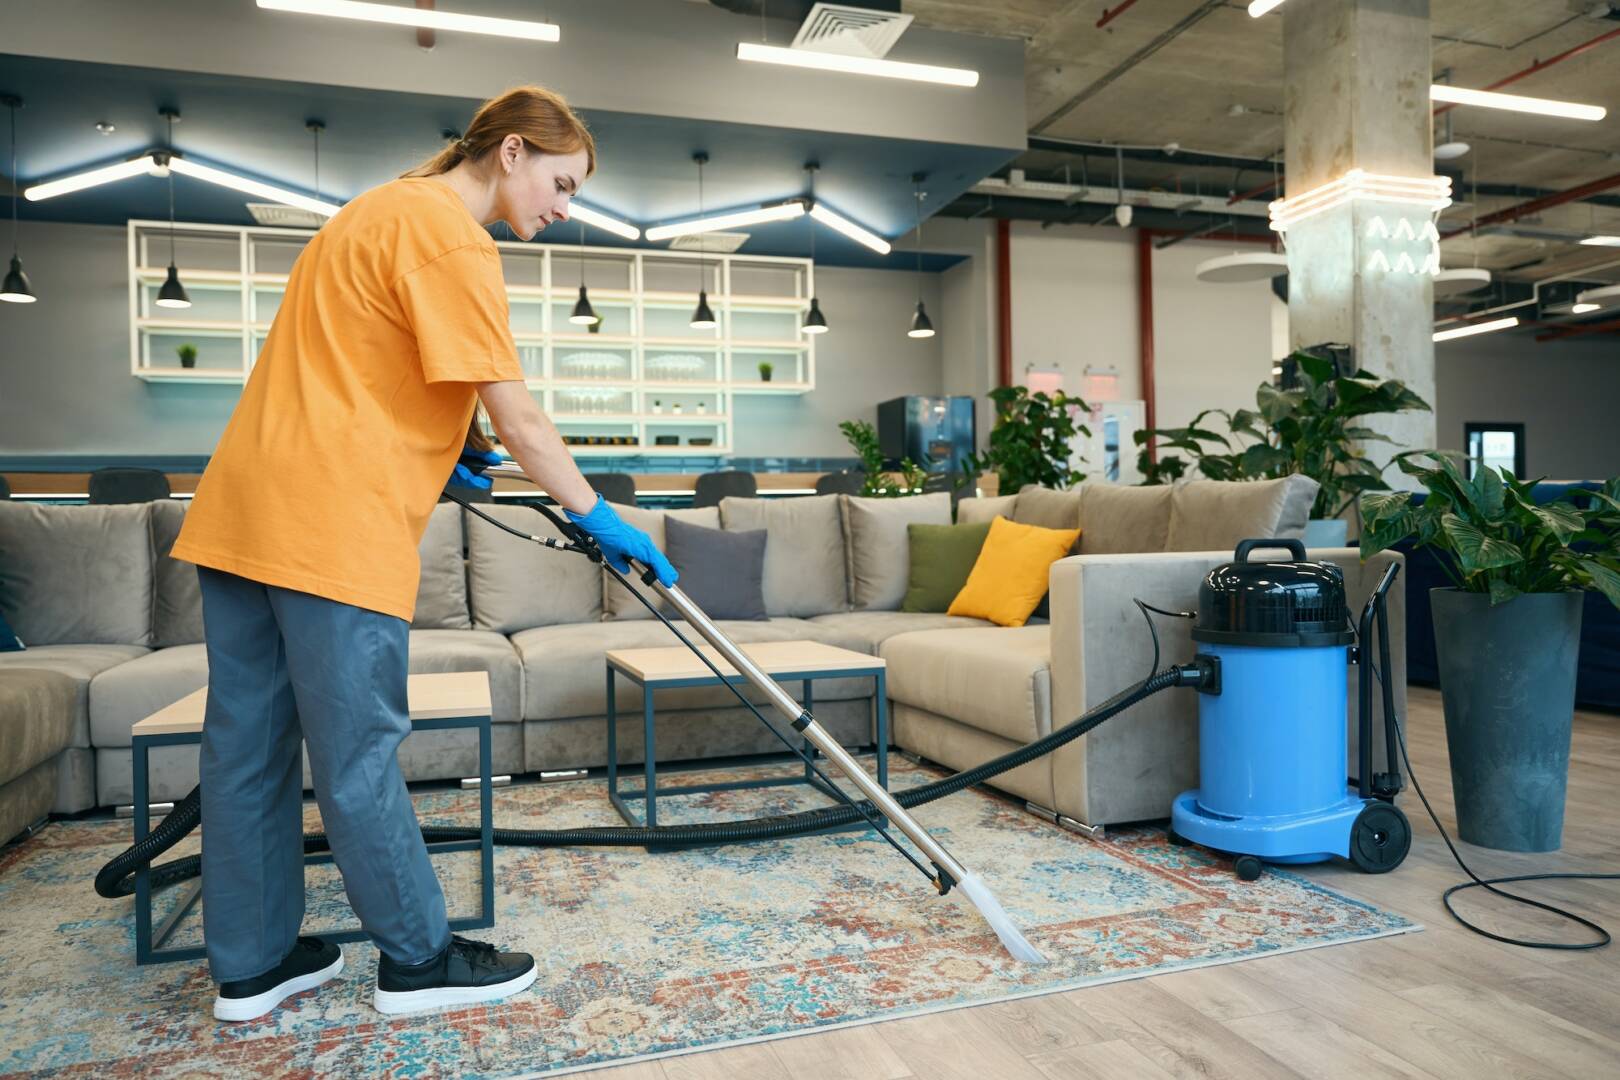 Cleaning company worker cleans a carpet in a recreation area